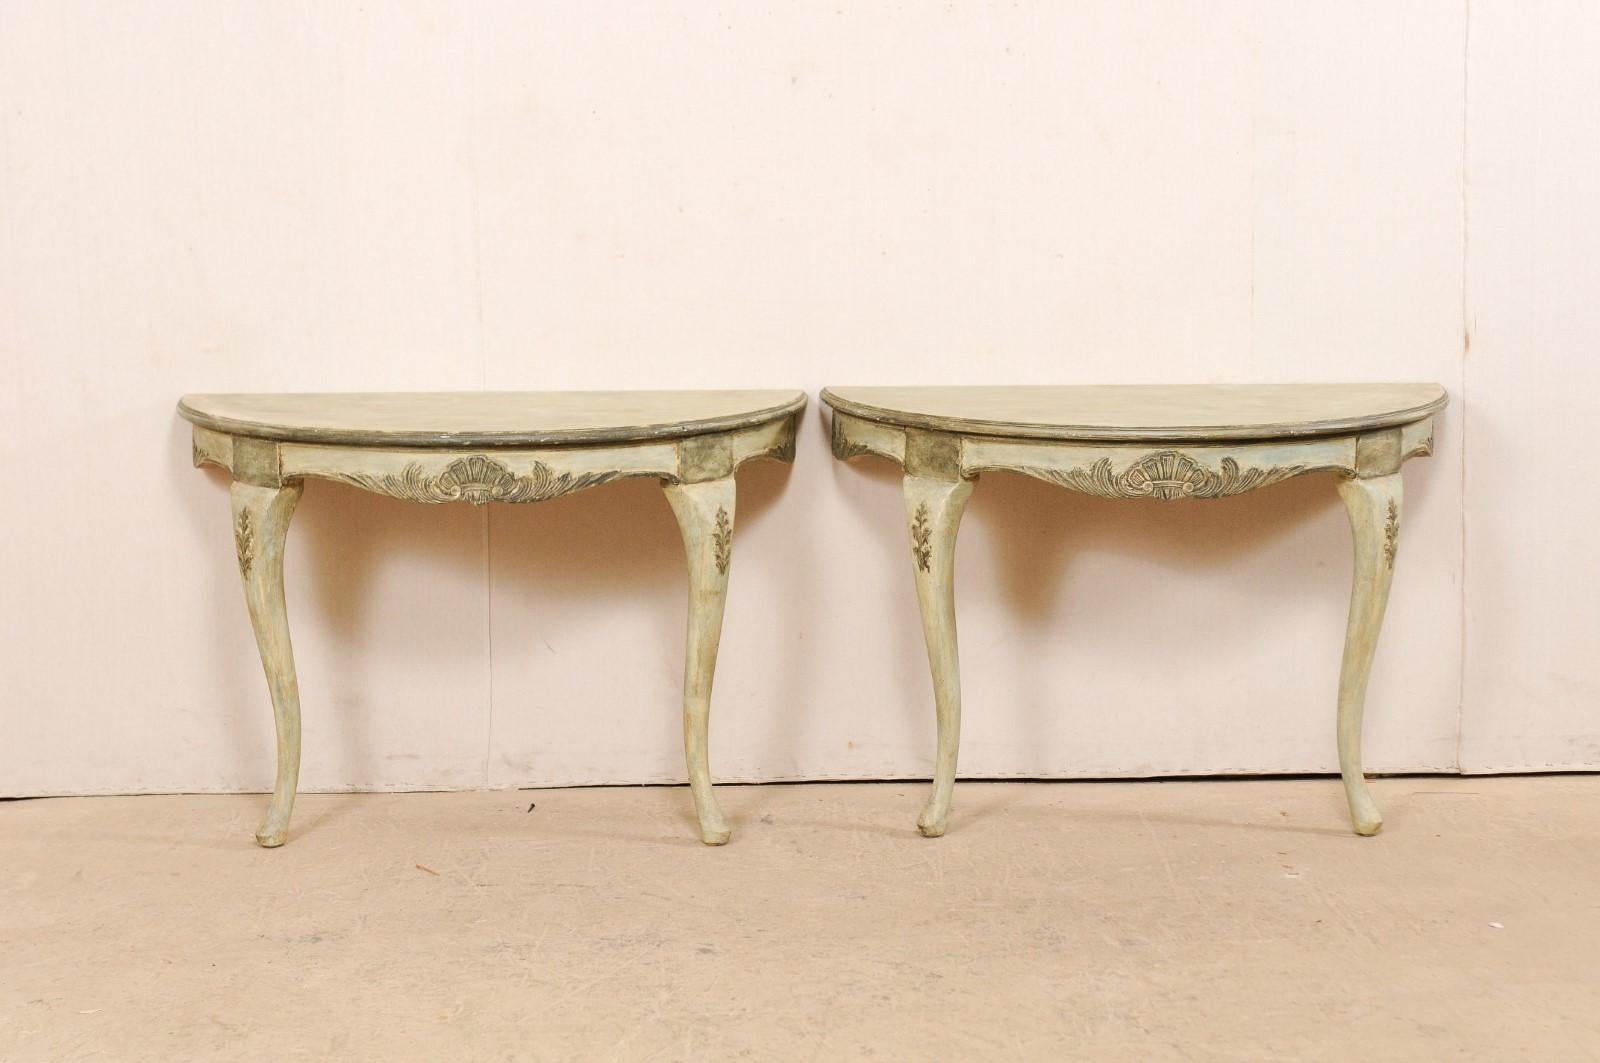 A Swedish pair of wall-mounted demilune tables from the mid-20th century. This vintage pair of wall consoles from Italy each feature a half moon top, over rounded aprons, with a carved decor of foliage motif and shell at front center. The tables are